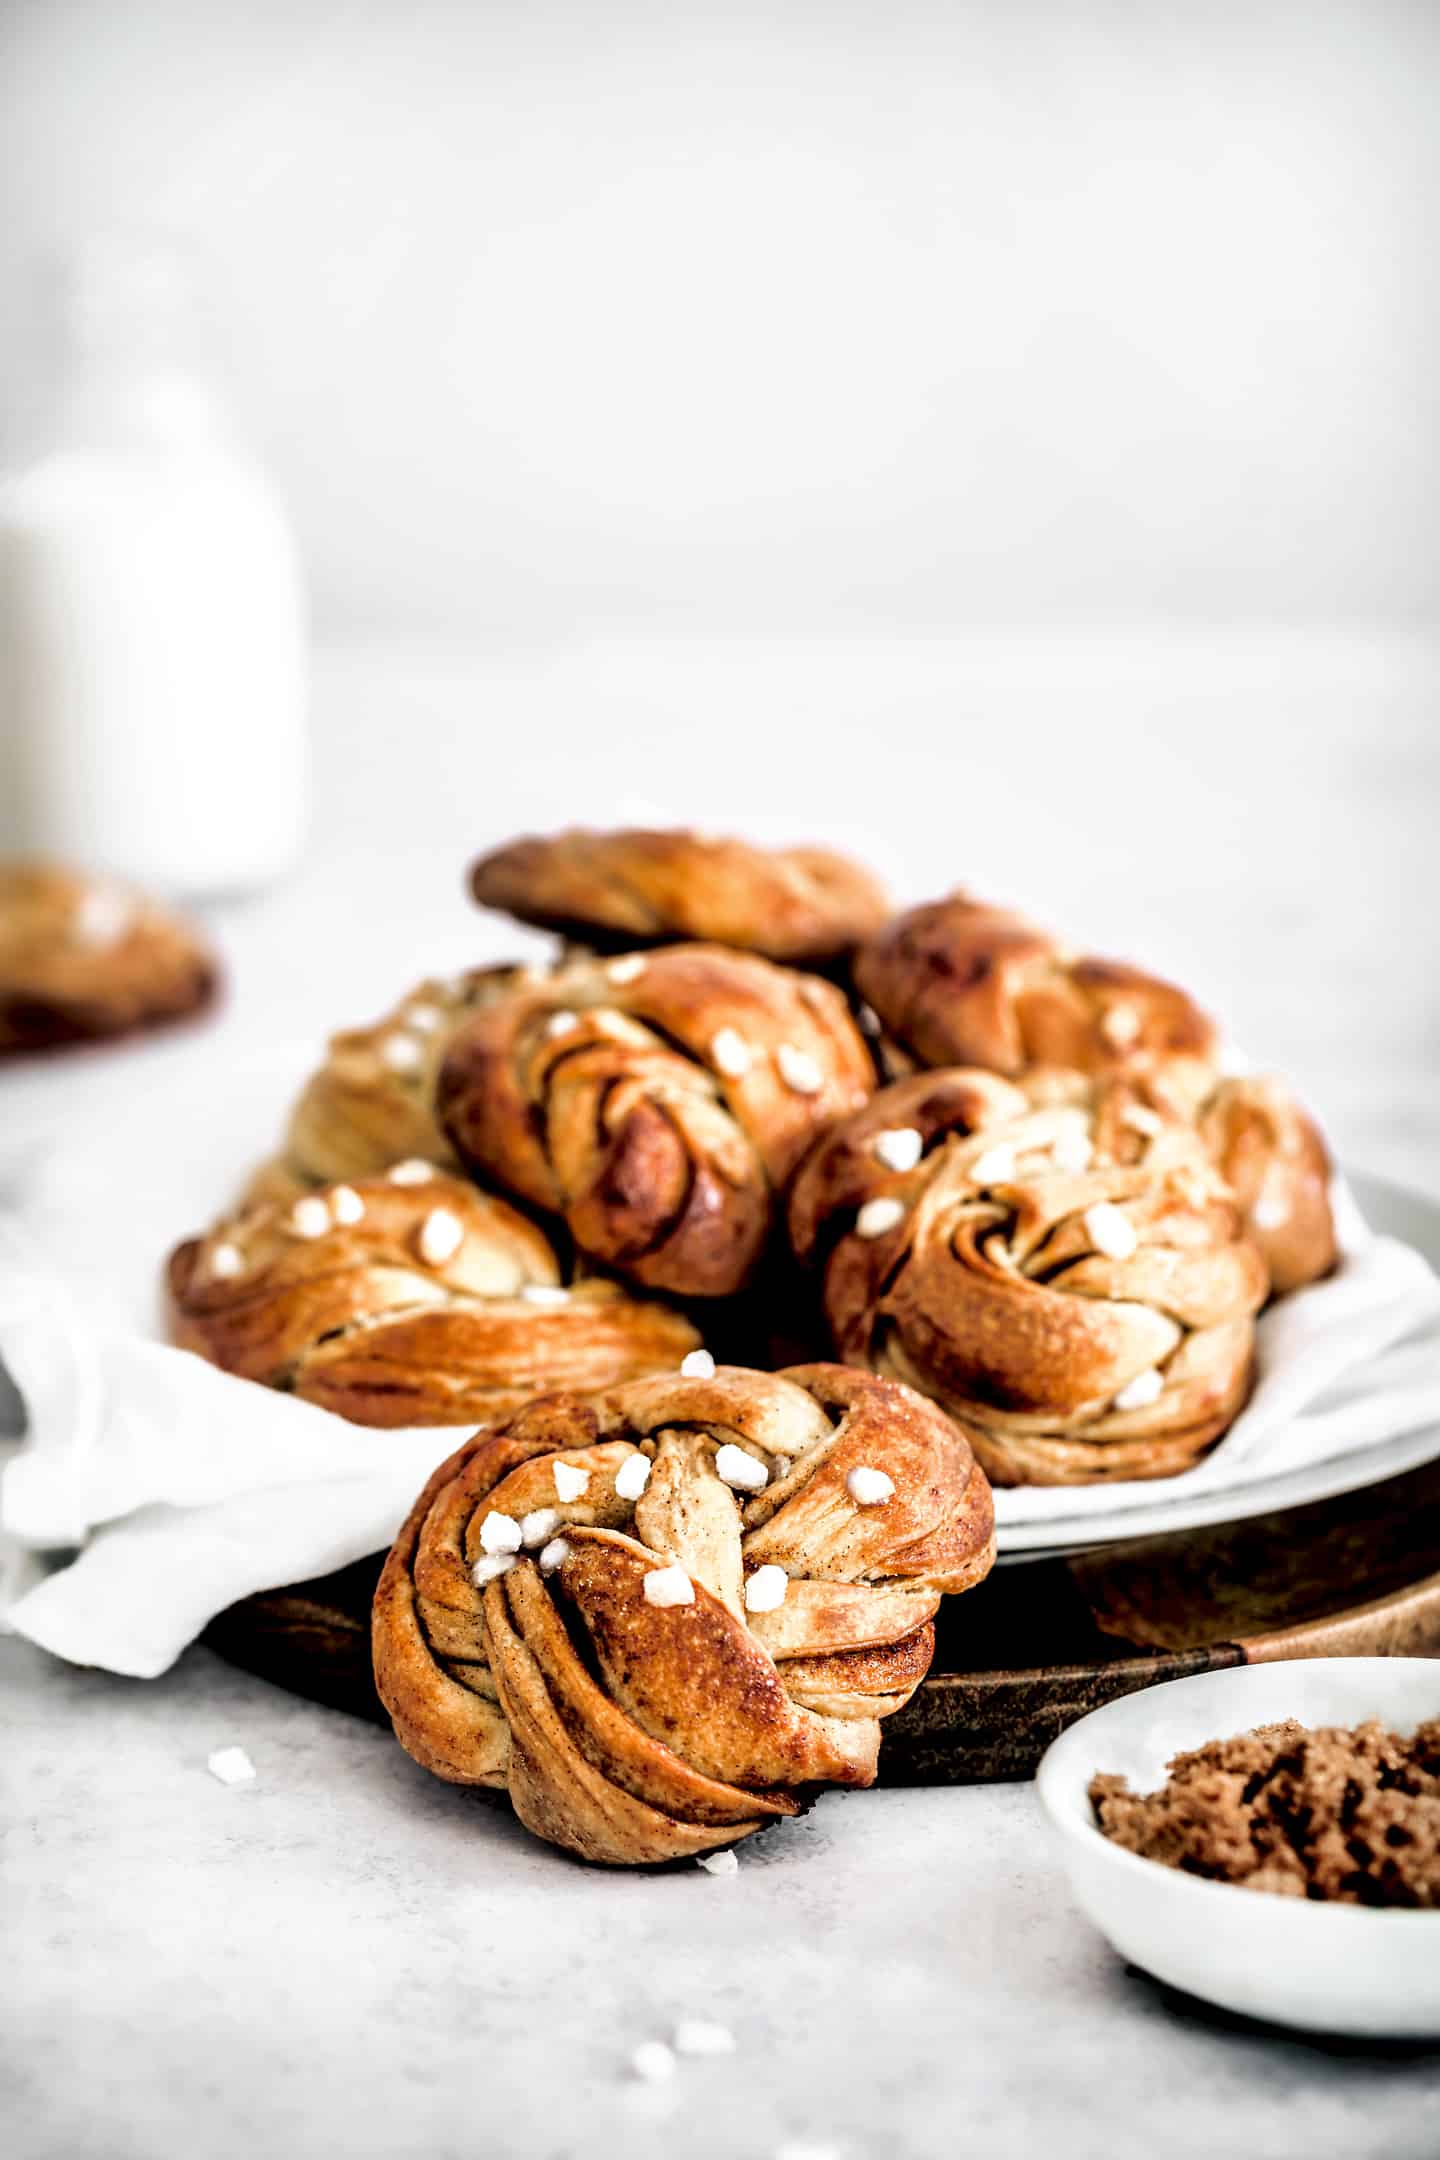 Kanelbullar Petits Pains Suedois A La Cannelle Sweetly Cakes Sweetly Cakes